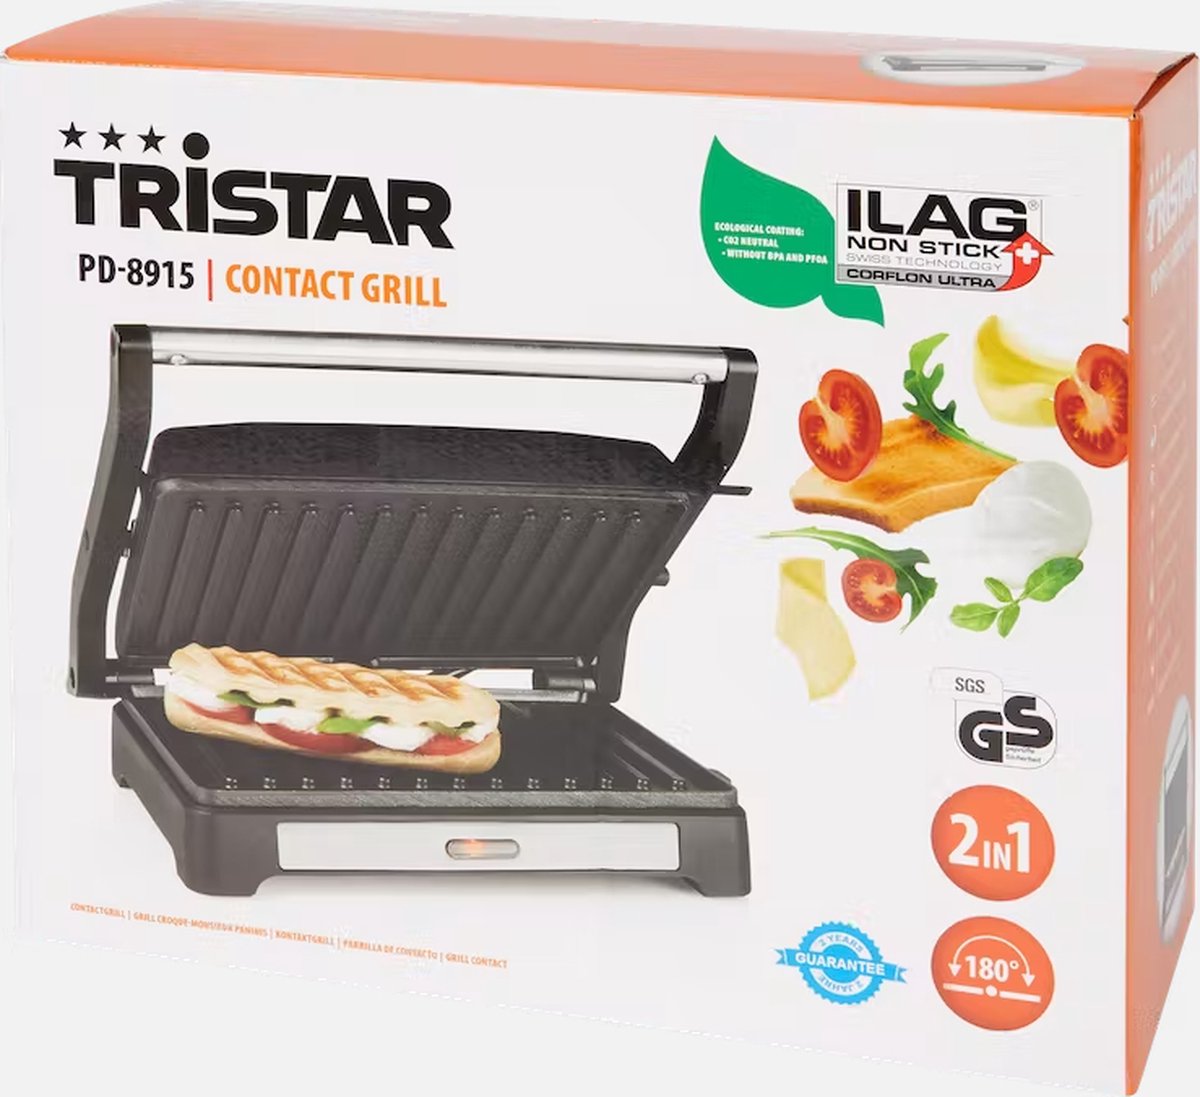 Tristar PD-8915 Tristar Contact grill